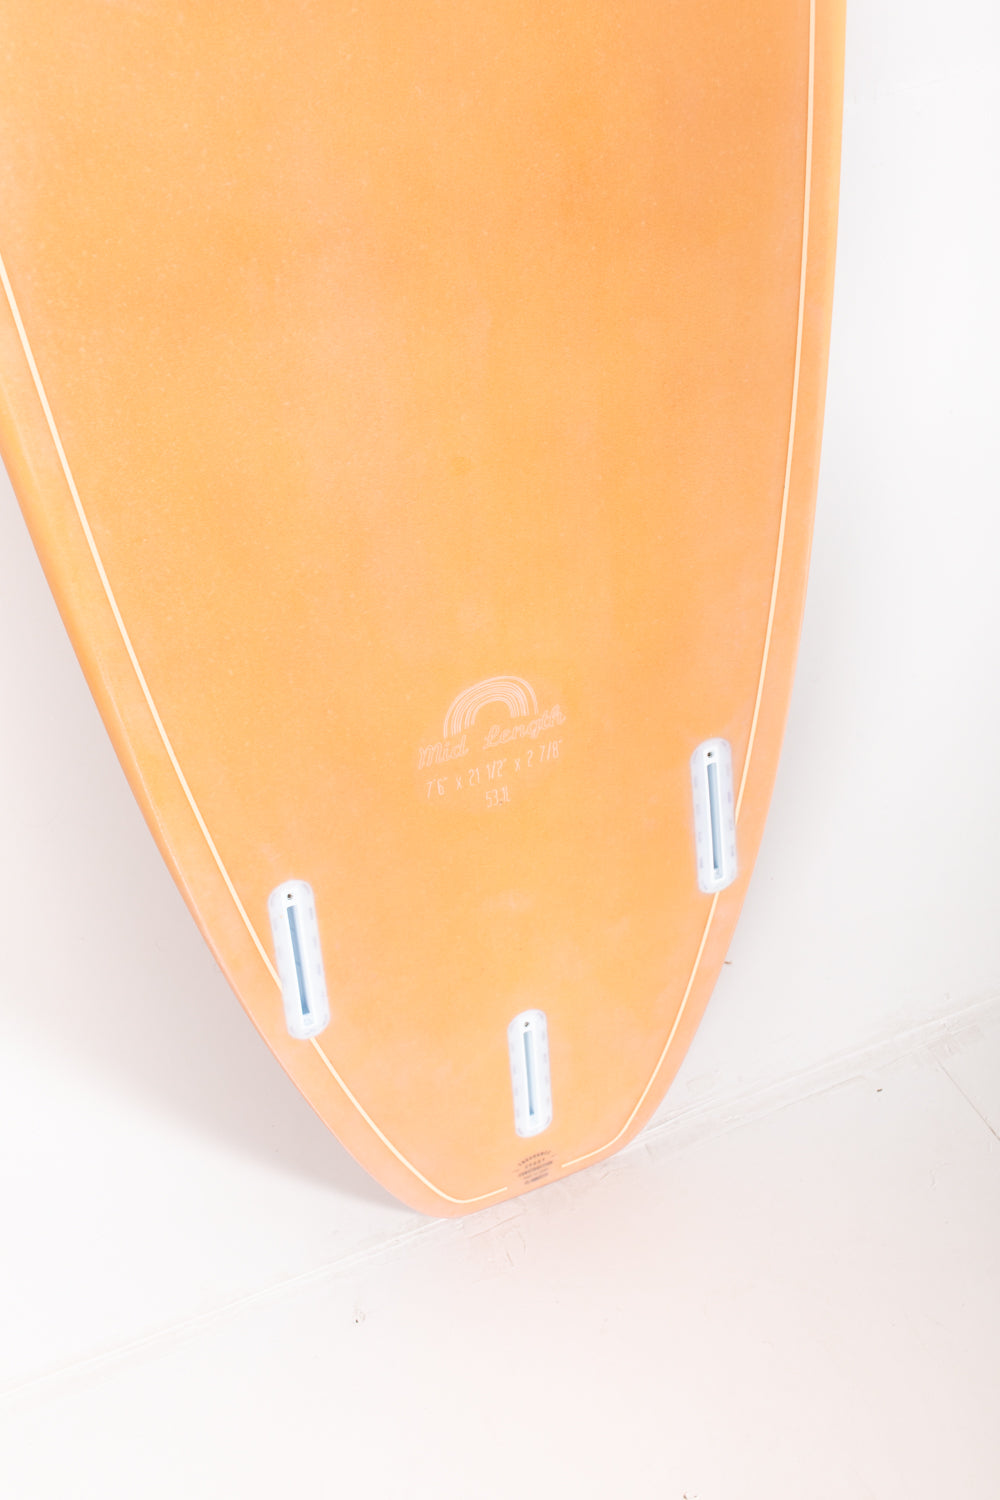 Indio Surfboards - MID LENGTH - 7'0